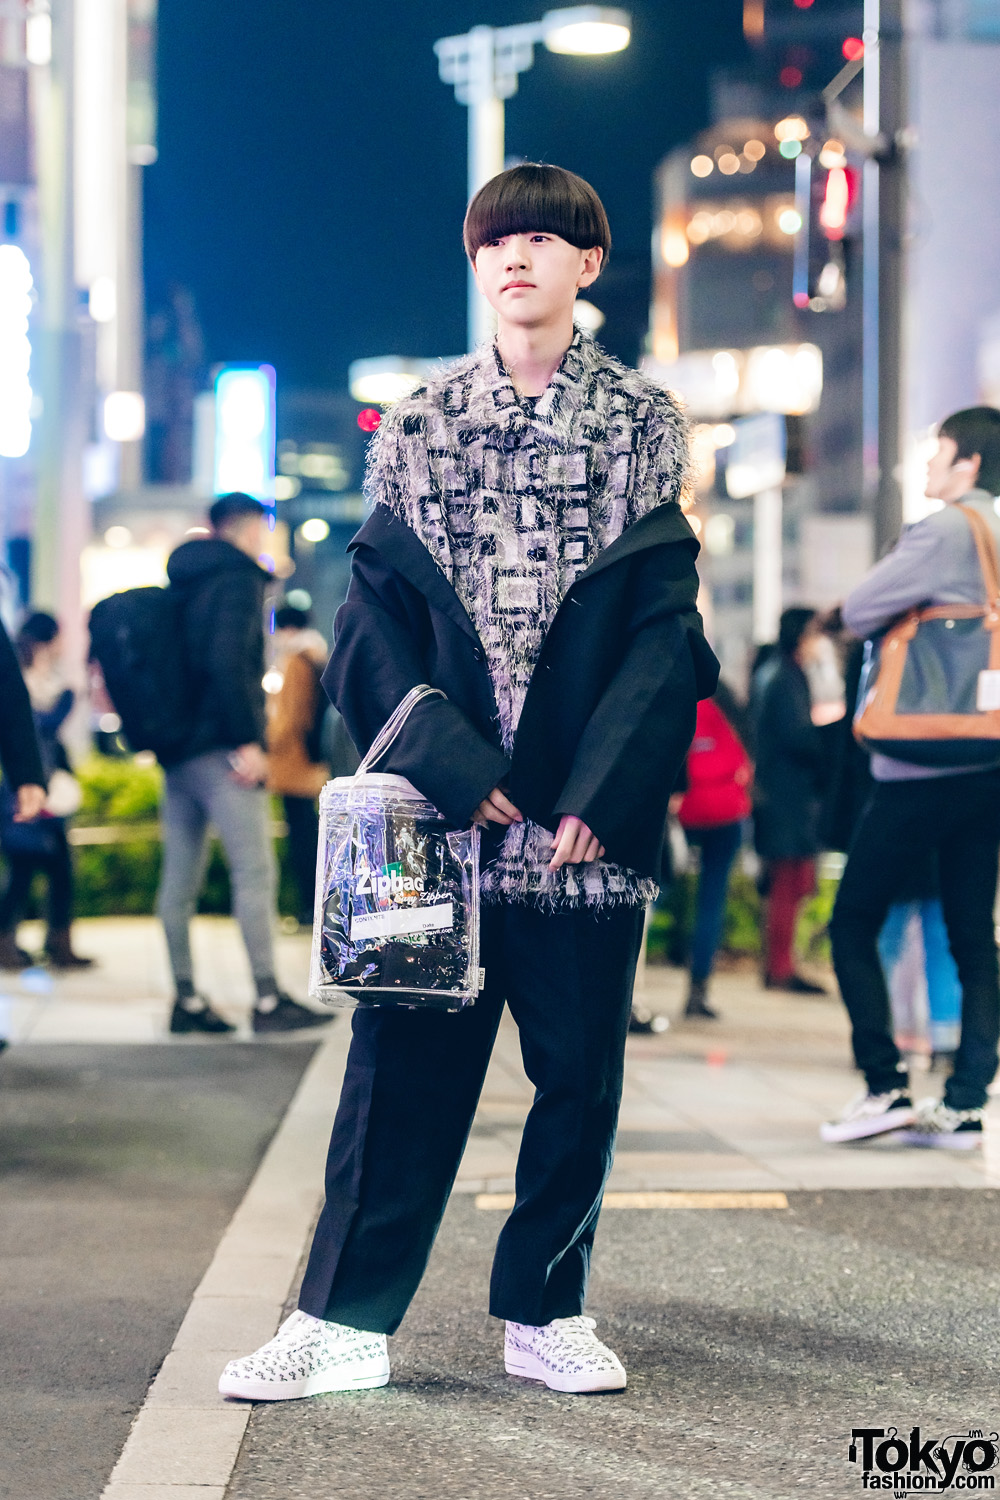 Harajuku Guy in Quirky Street Fashion w/ Comme des Garcons Ensemble, Resale Fringe Top, Nike Sneakers & Ziploc Tote Bag